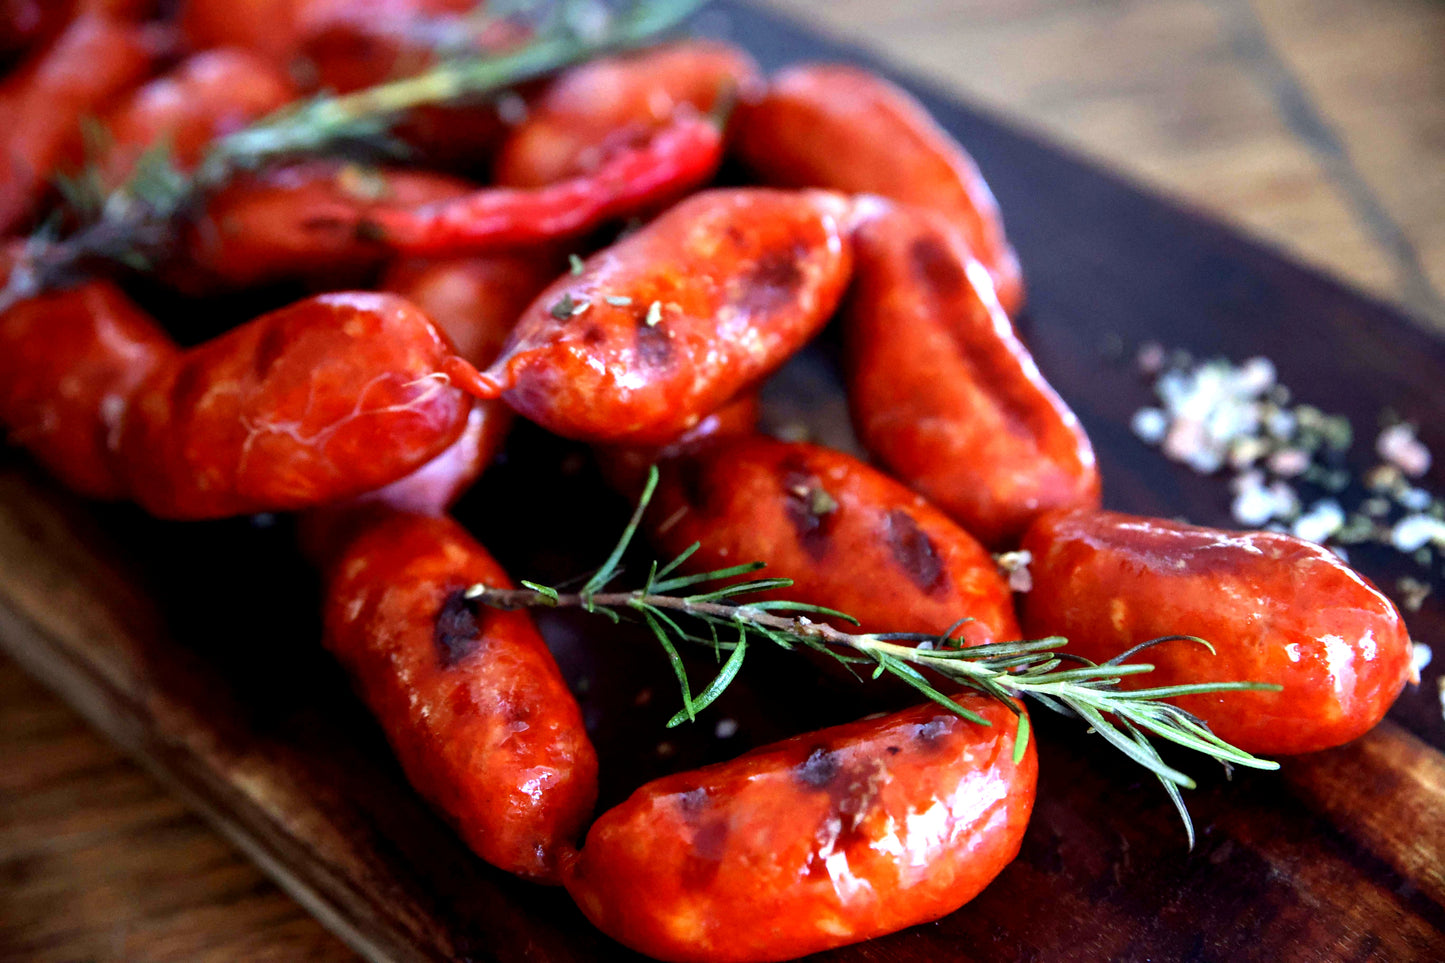 HOT Fresh Spanish Chorizito Choricito Mini Chorizo 18 piece pack approx. 900g packet. Regular price $17.00. [You are guaranteed to receive at least 855g of product, equivalent price of $20.00 per kg.]